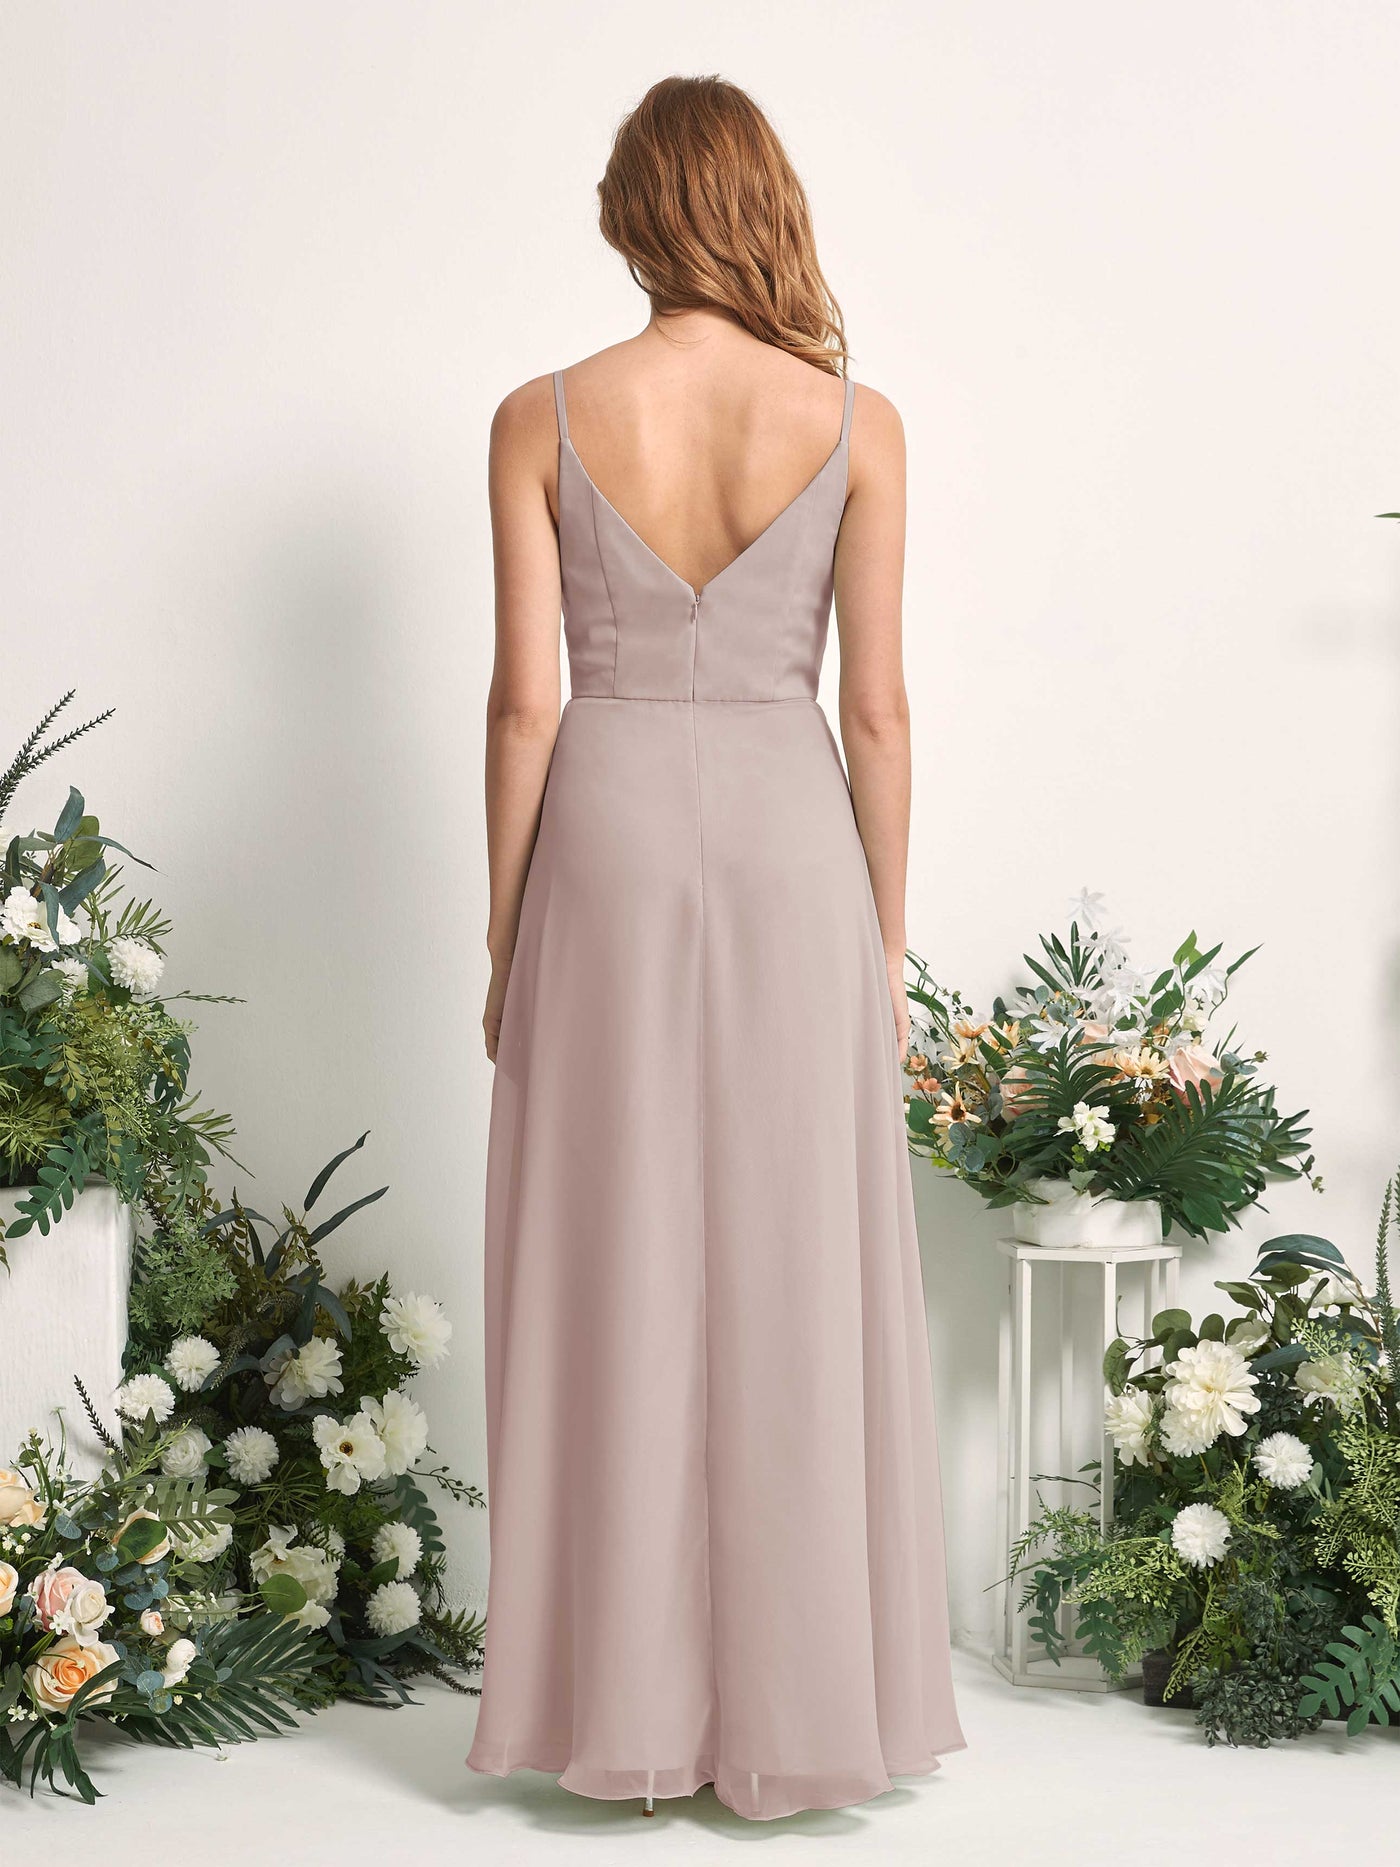 Bridesmaid Dress A-line Chiffon Spaghetti-straps Full Length Sleeveless Wedding Party Dress - Taupe (81227224)#color_taupe